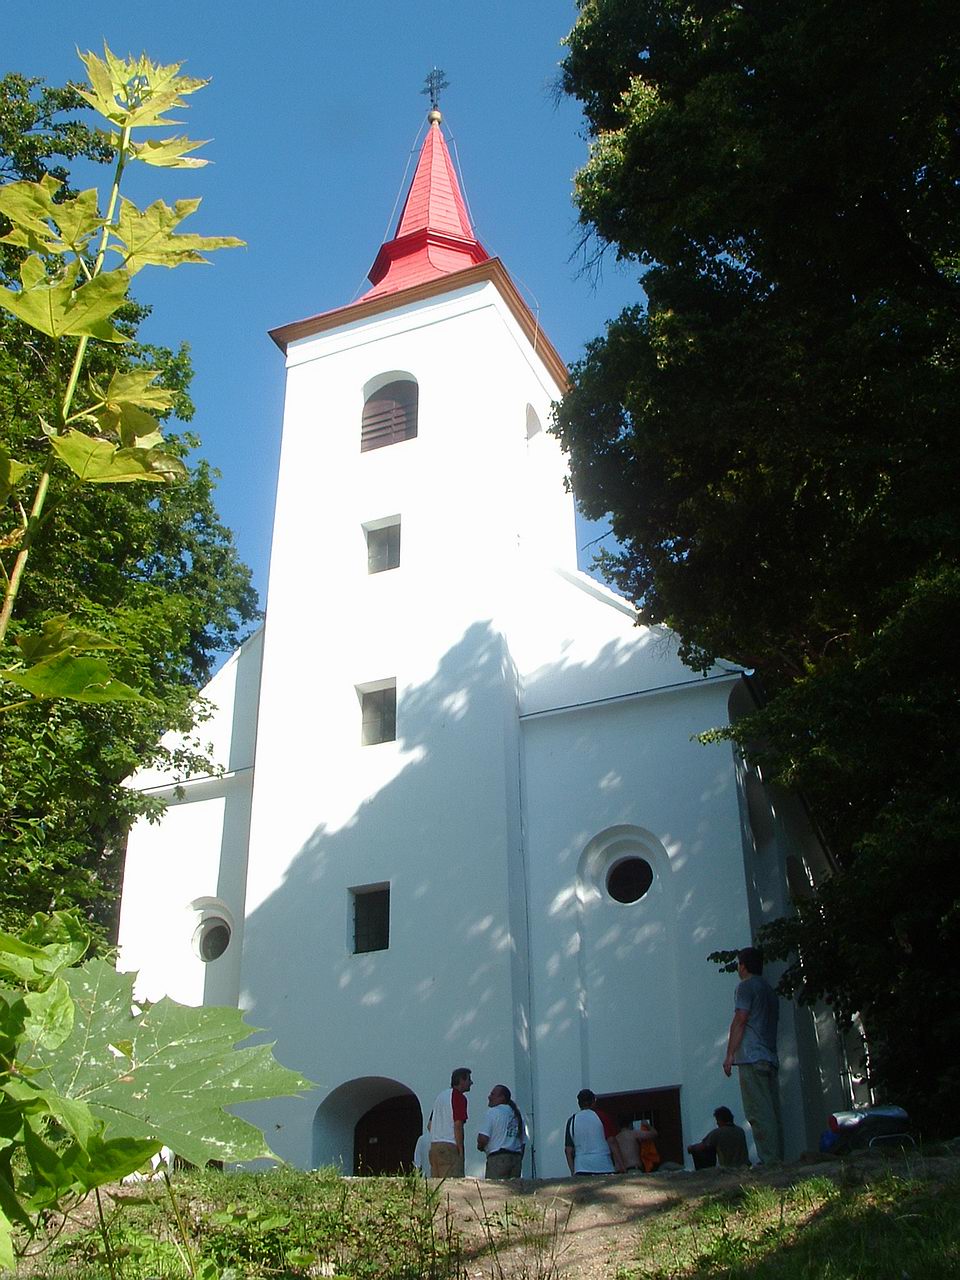 The Szent Vid Chapel stands on the top of the hill